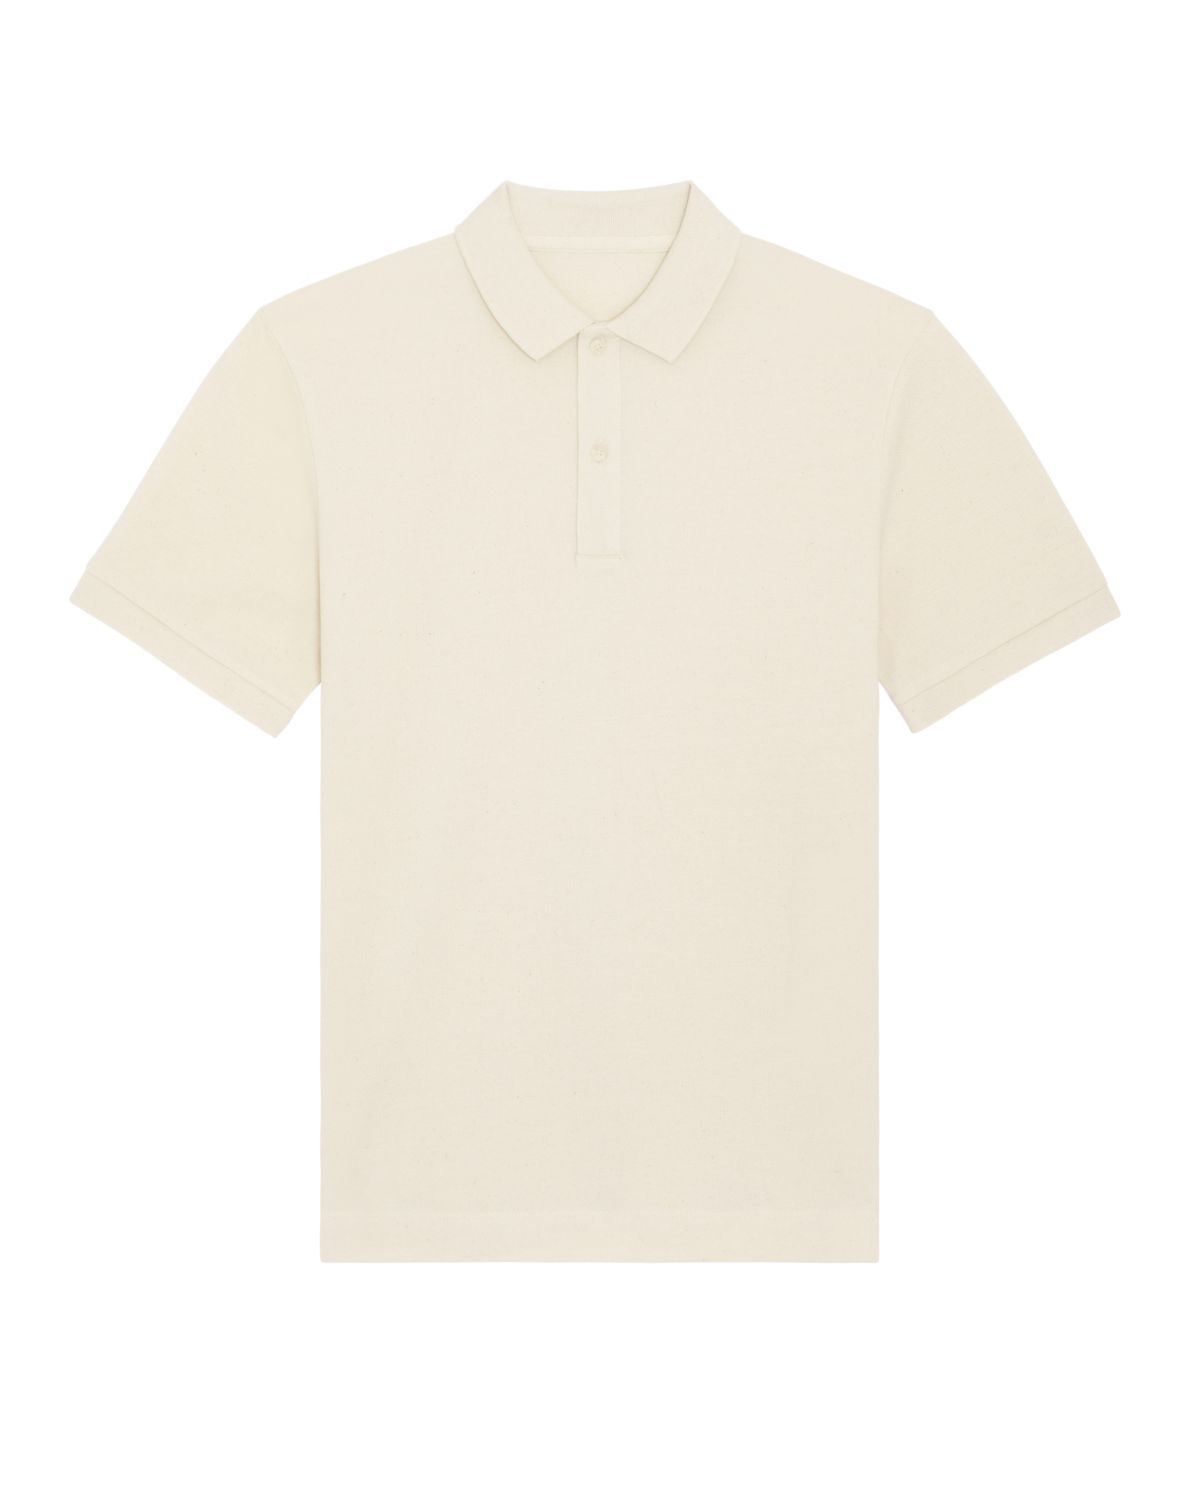 Customize your own polo shirt made of 100% GOTS-certified organic cotton